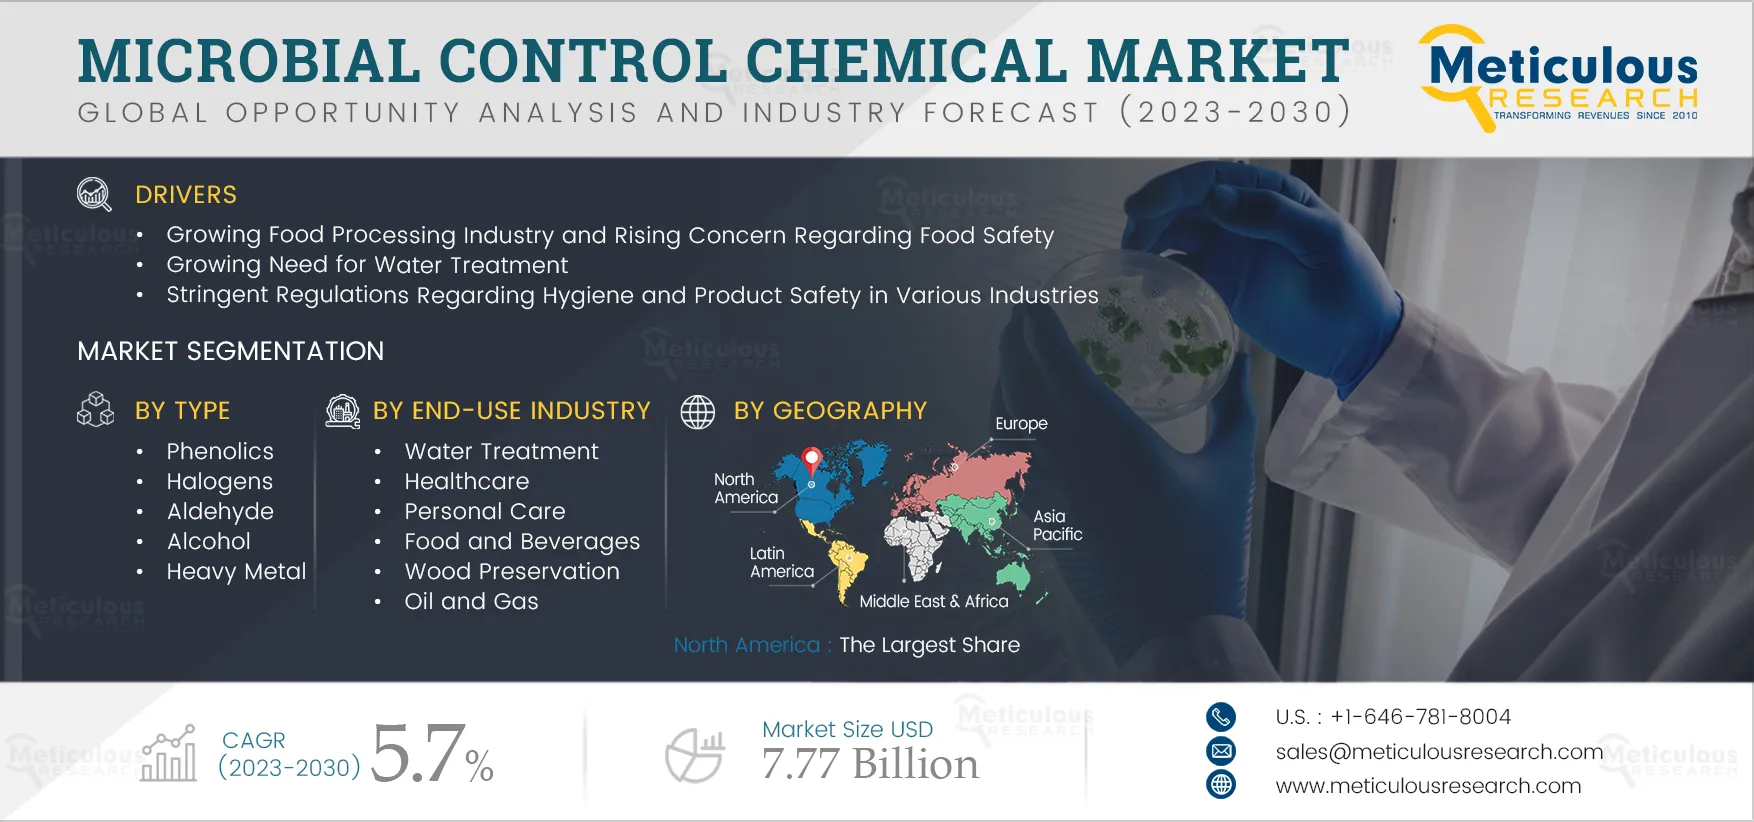 Microbial Control Chemical Market 